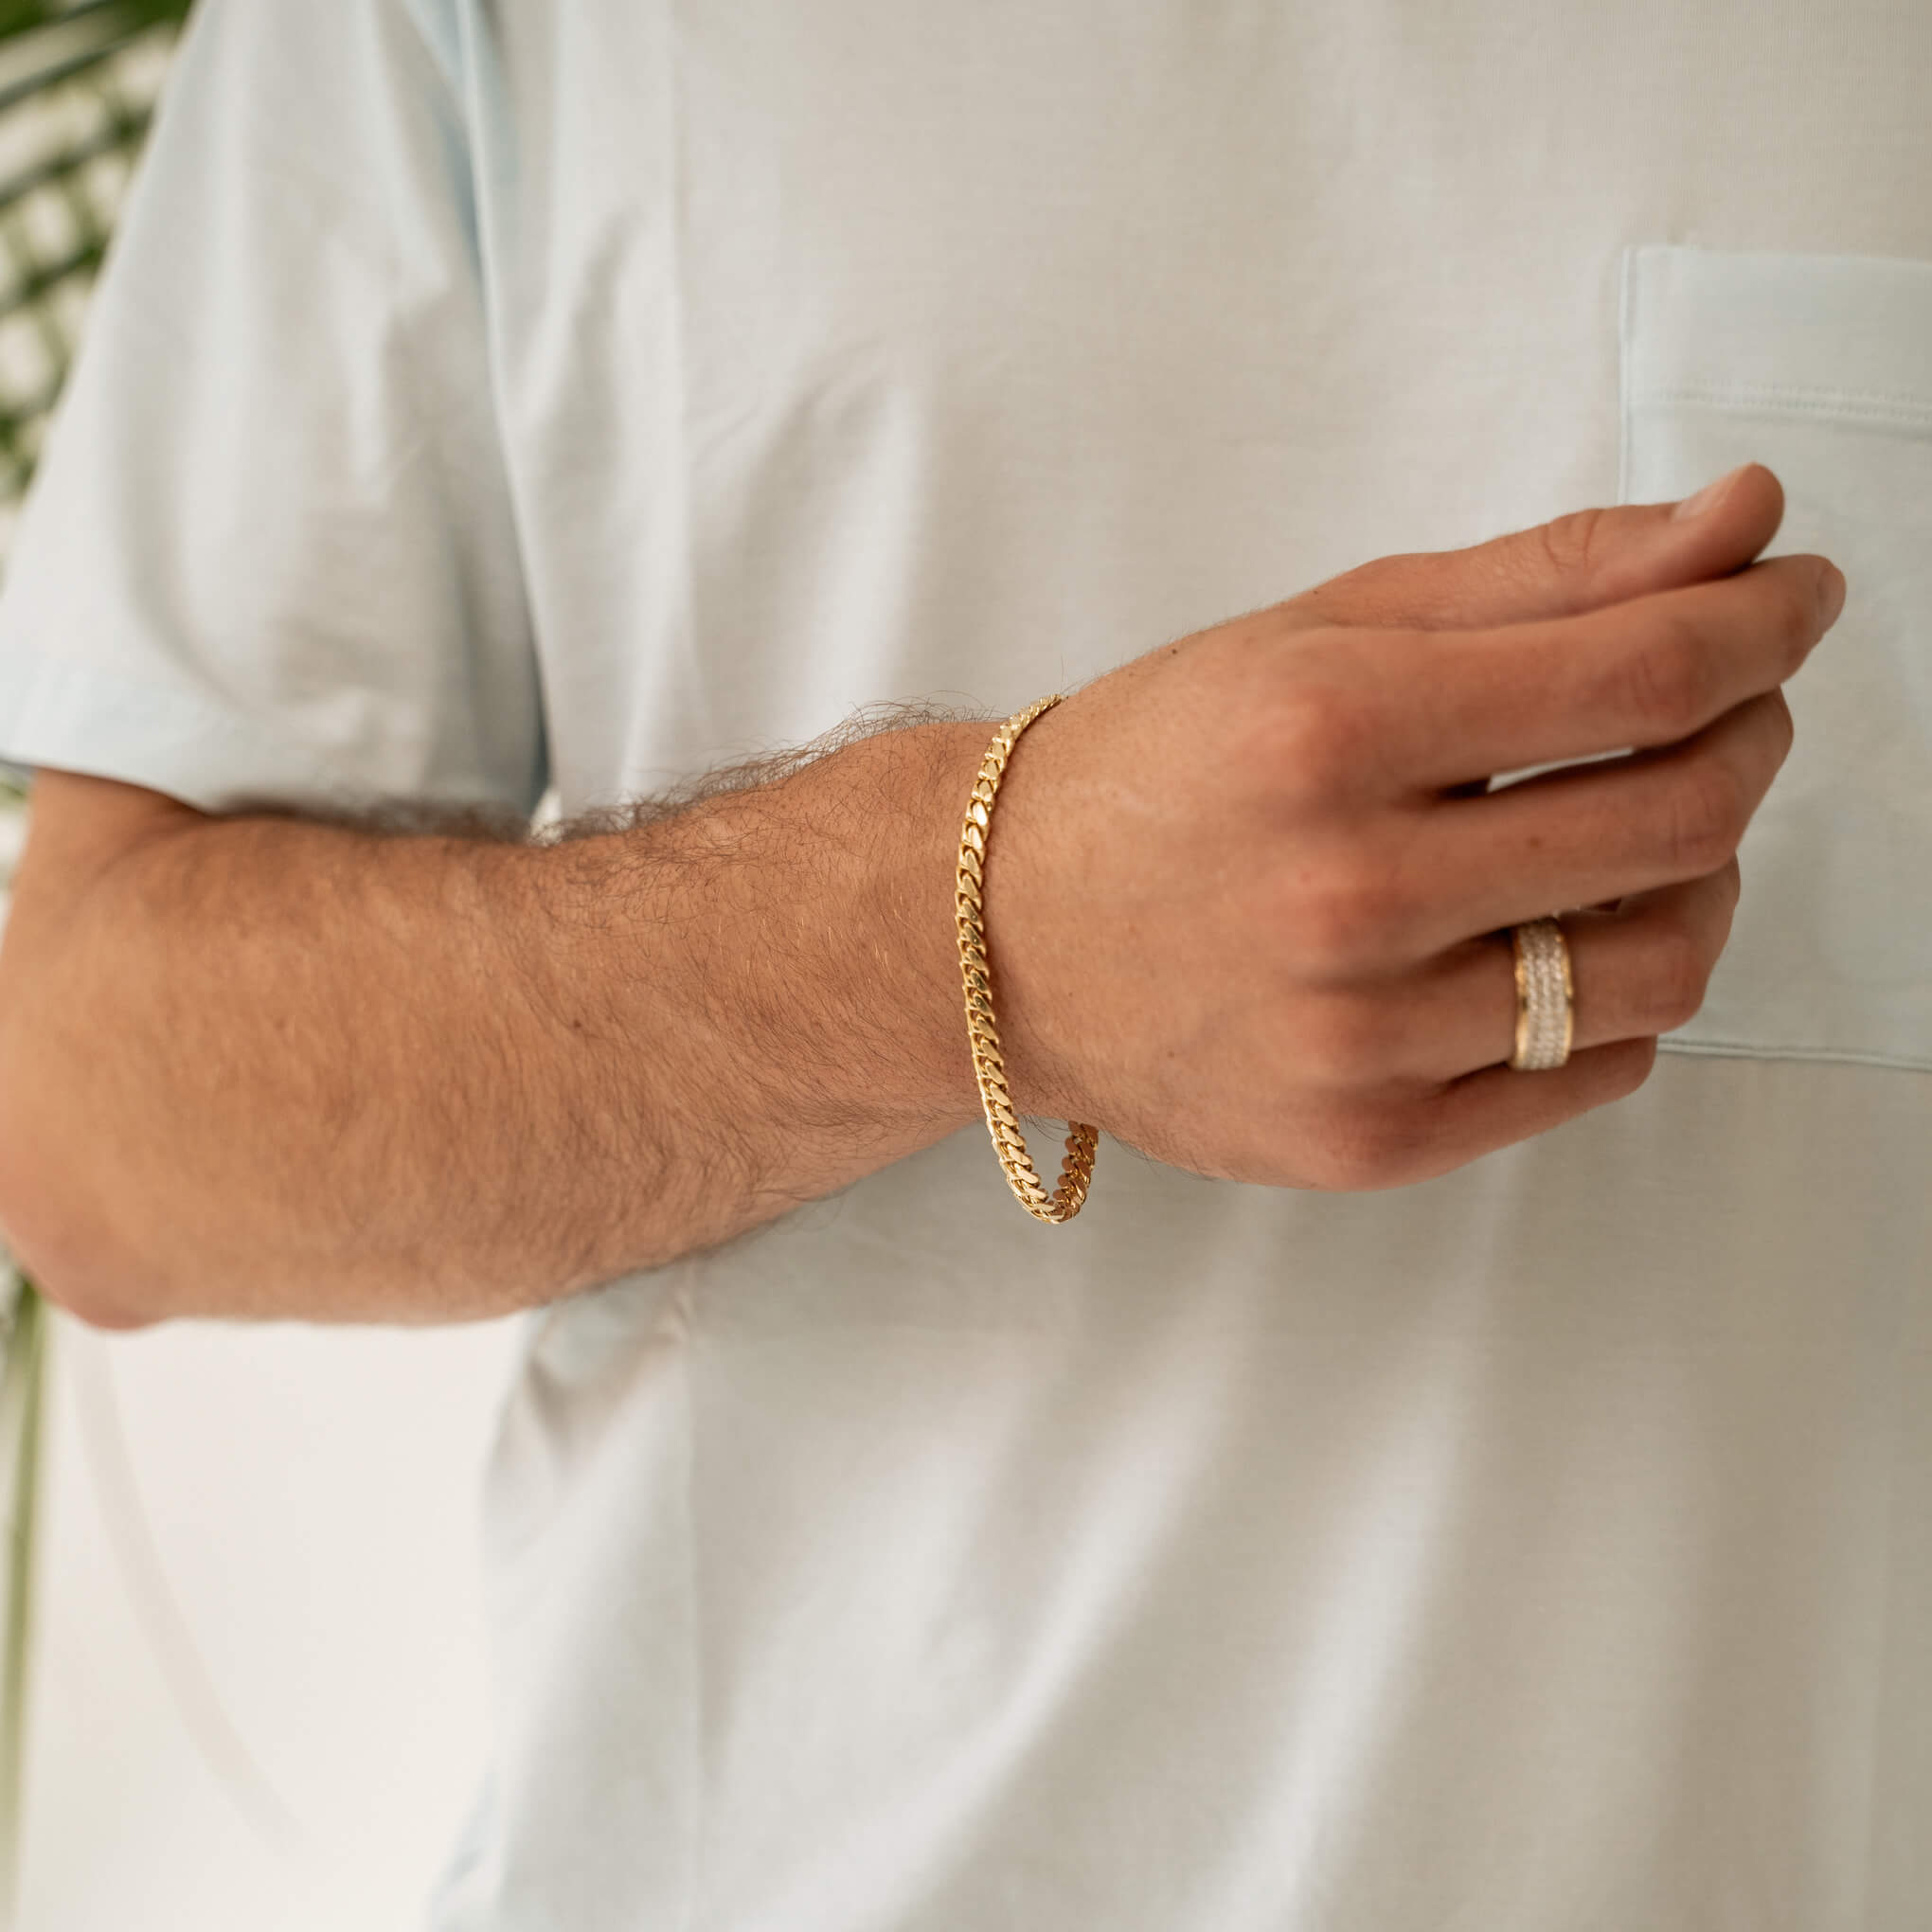 Gold Chains & Bracelets | Home of the Handmade Miami Cuban Link